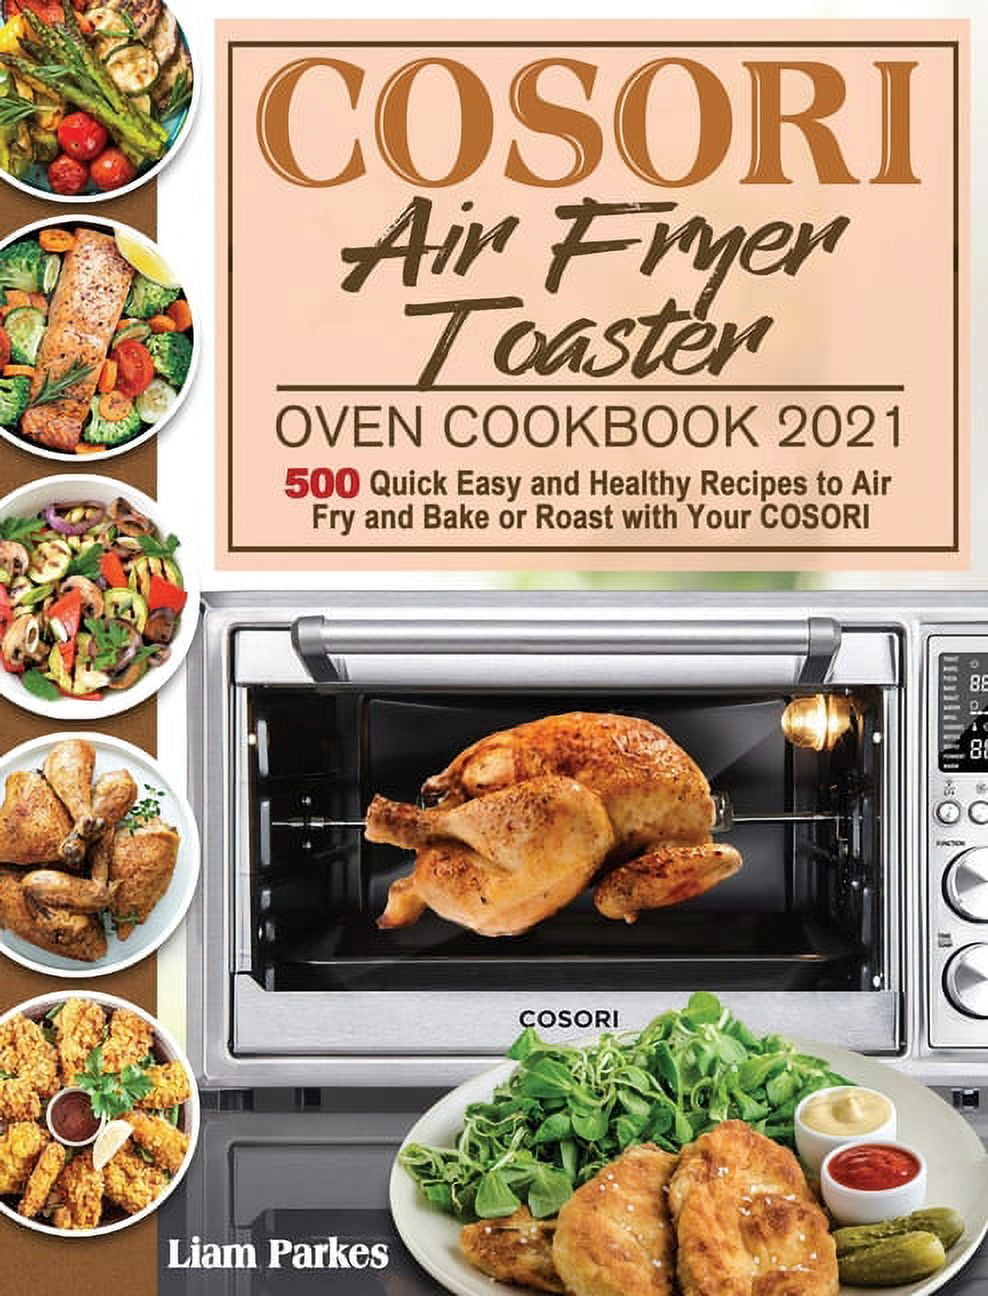 COSORI Air Fryer Toaster Oven Cookbook 2021: 500 Quick Easy and Healthy Recipes to Air Fry and Bake Or Roast with Your COSORI [Book]